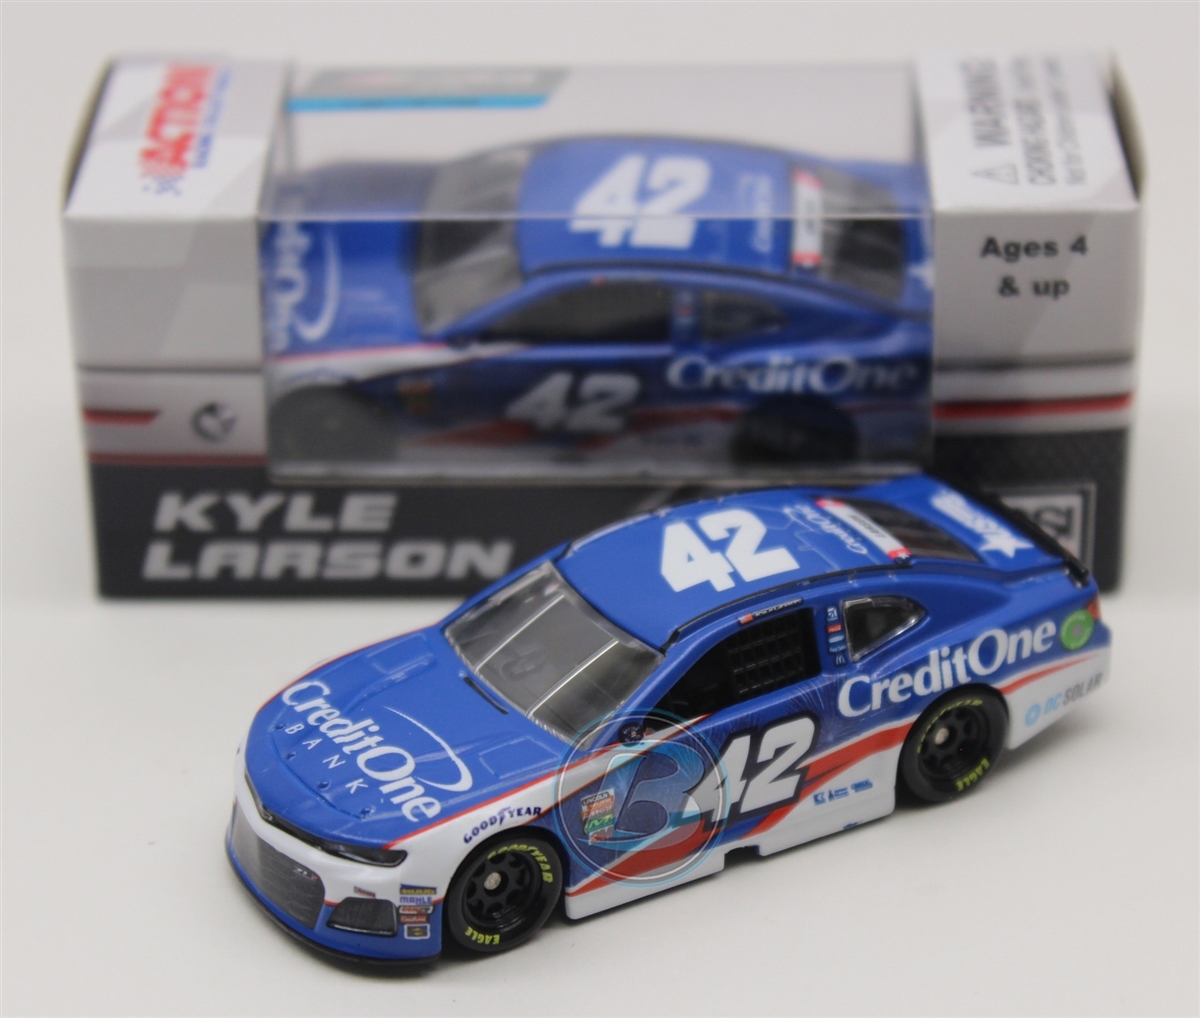 Details about   2018 KYLE LARSON #42 Autographed Credit One Bank Stripe 1:24 144 Made Free Ship 